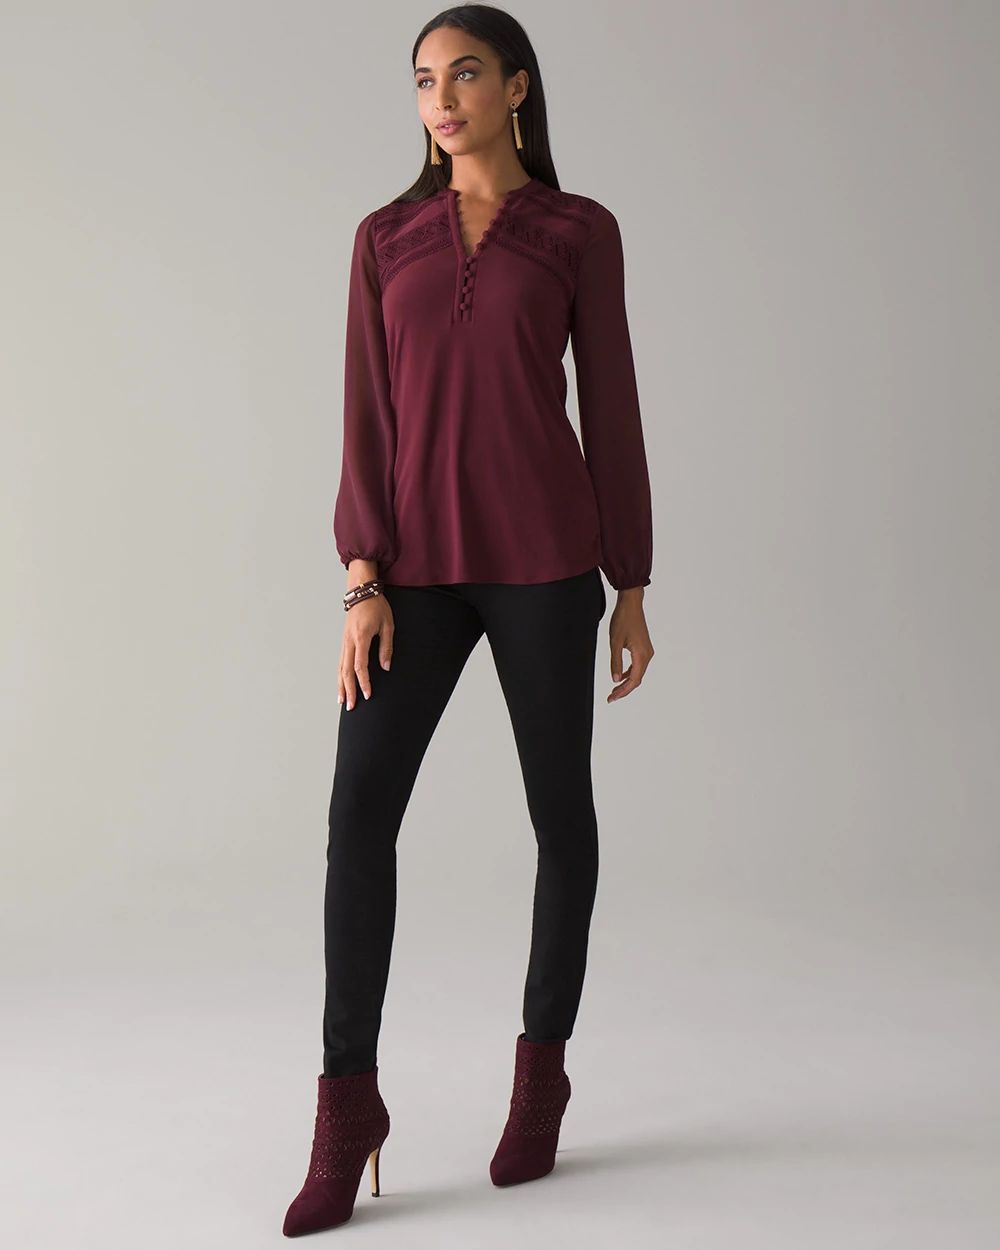 Petite Long-Sleeve Matte Jersey Tunic click to view larger image.